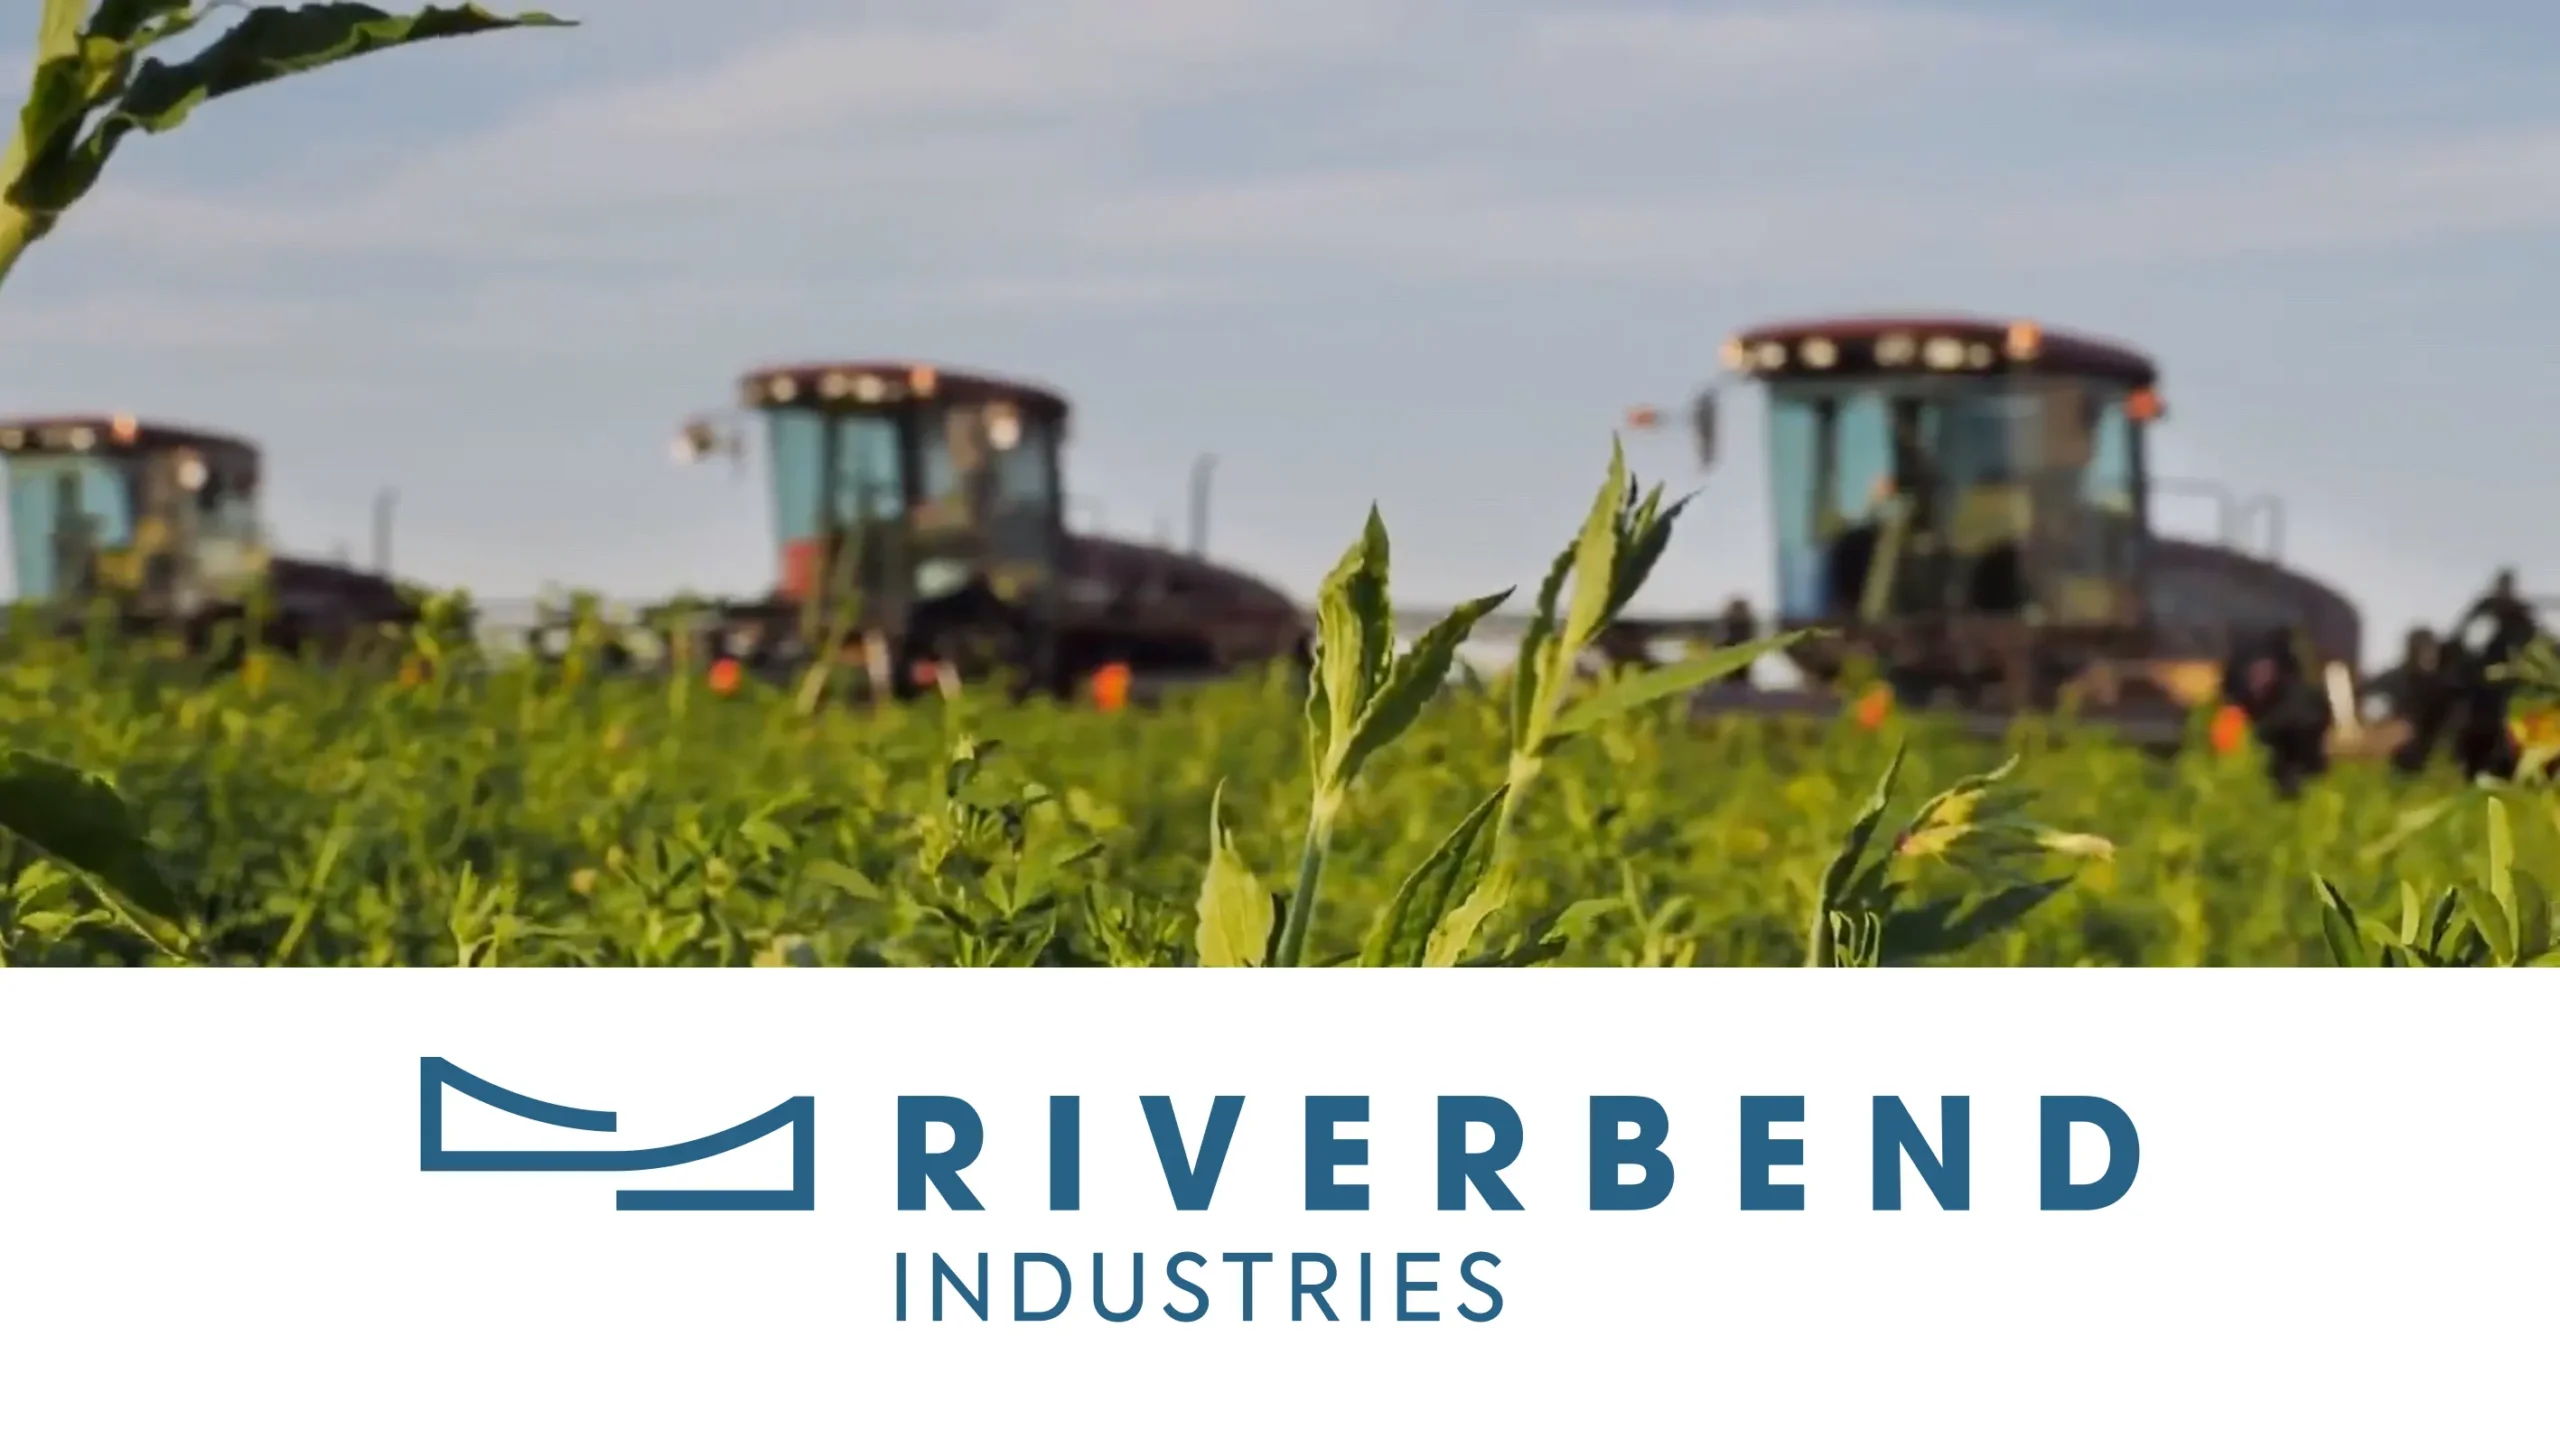 Riverbend Industries Announces Two Appointments to Board of Directors